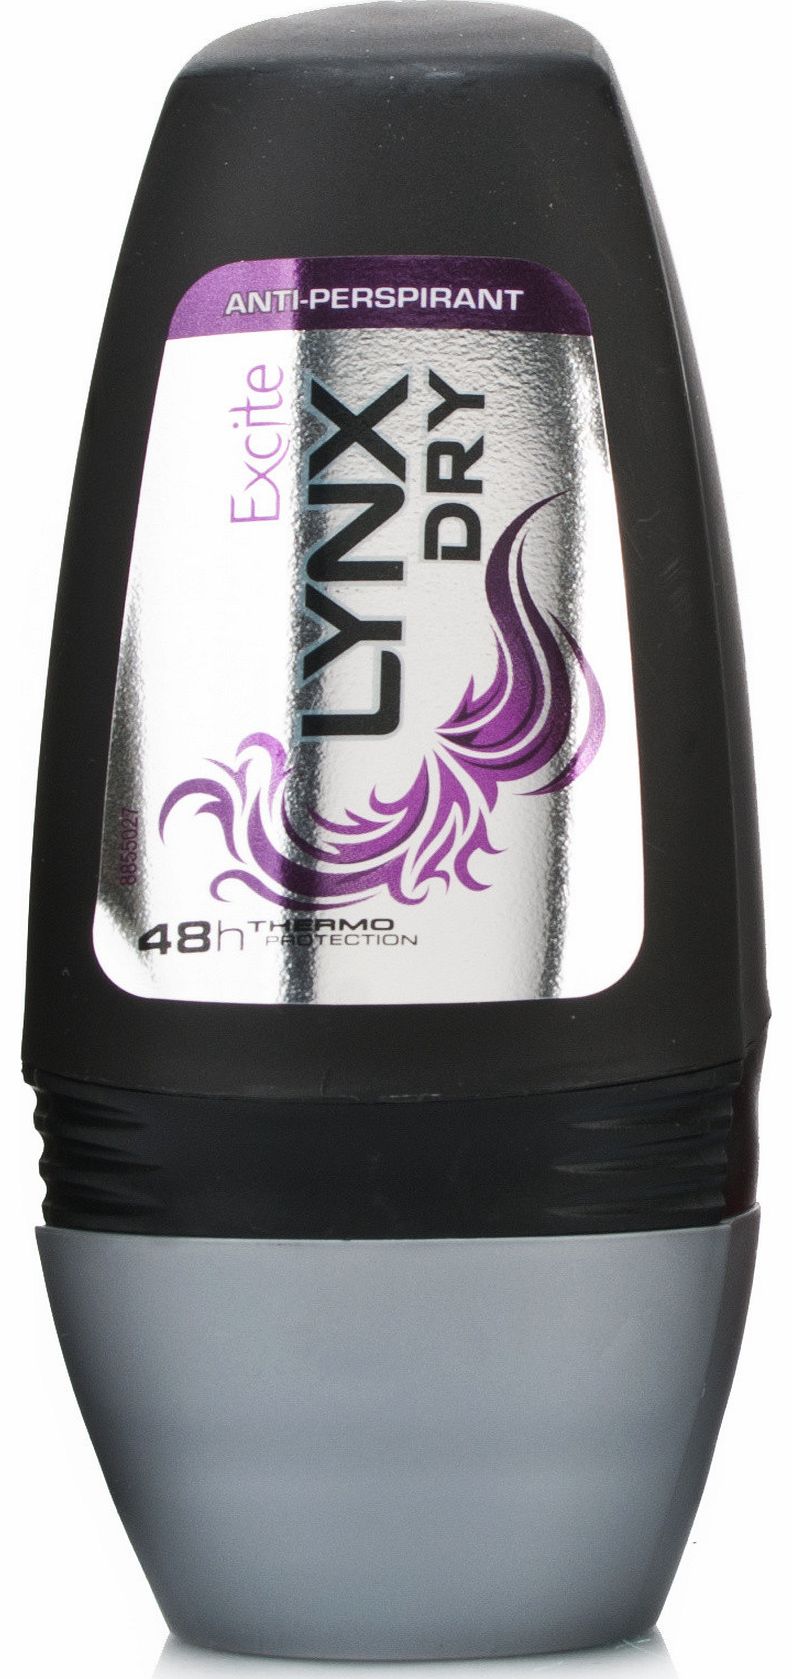 Lynx Dry Excite Anti-Perspirant Roll-On